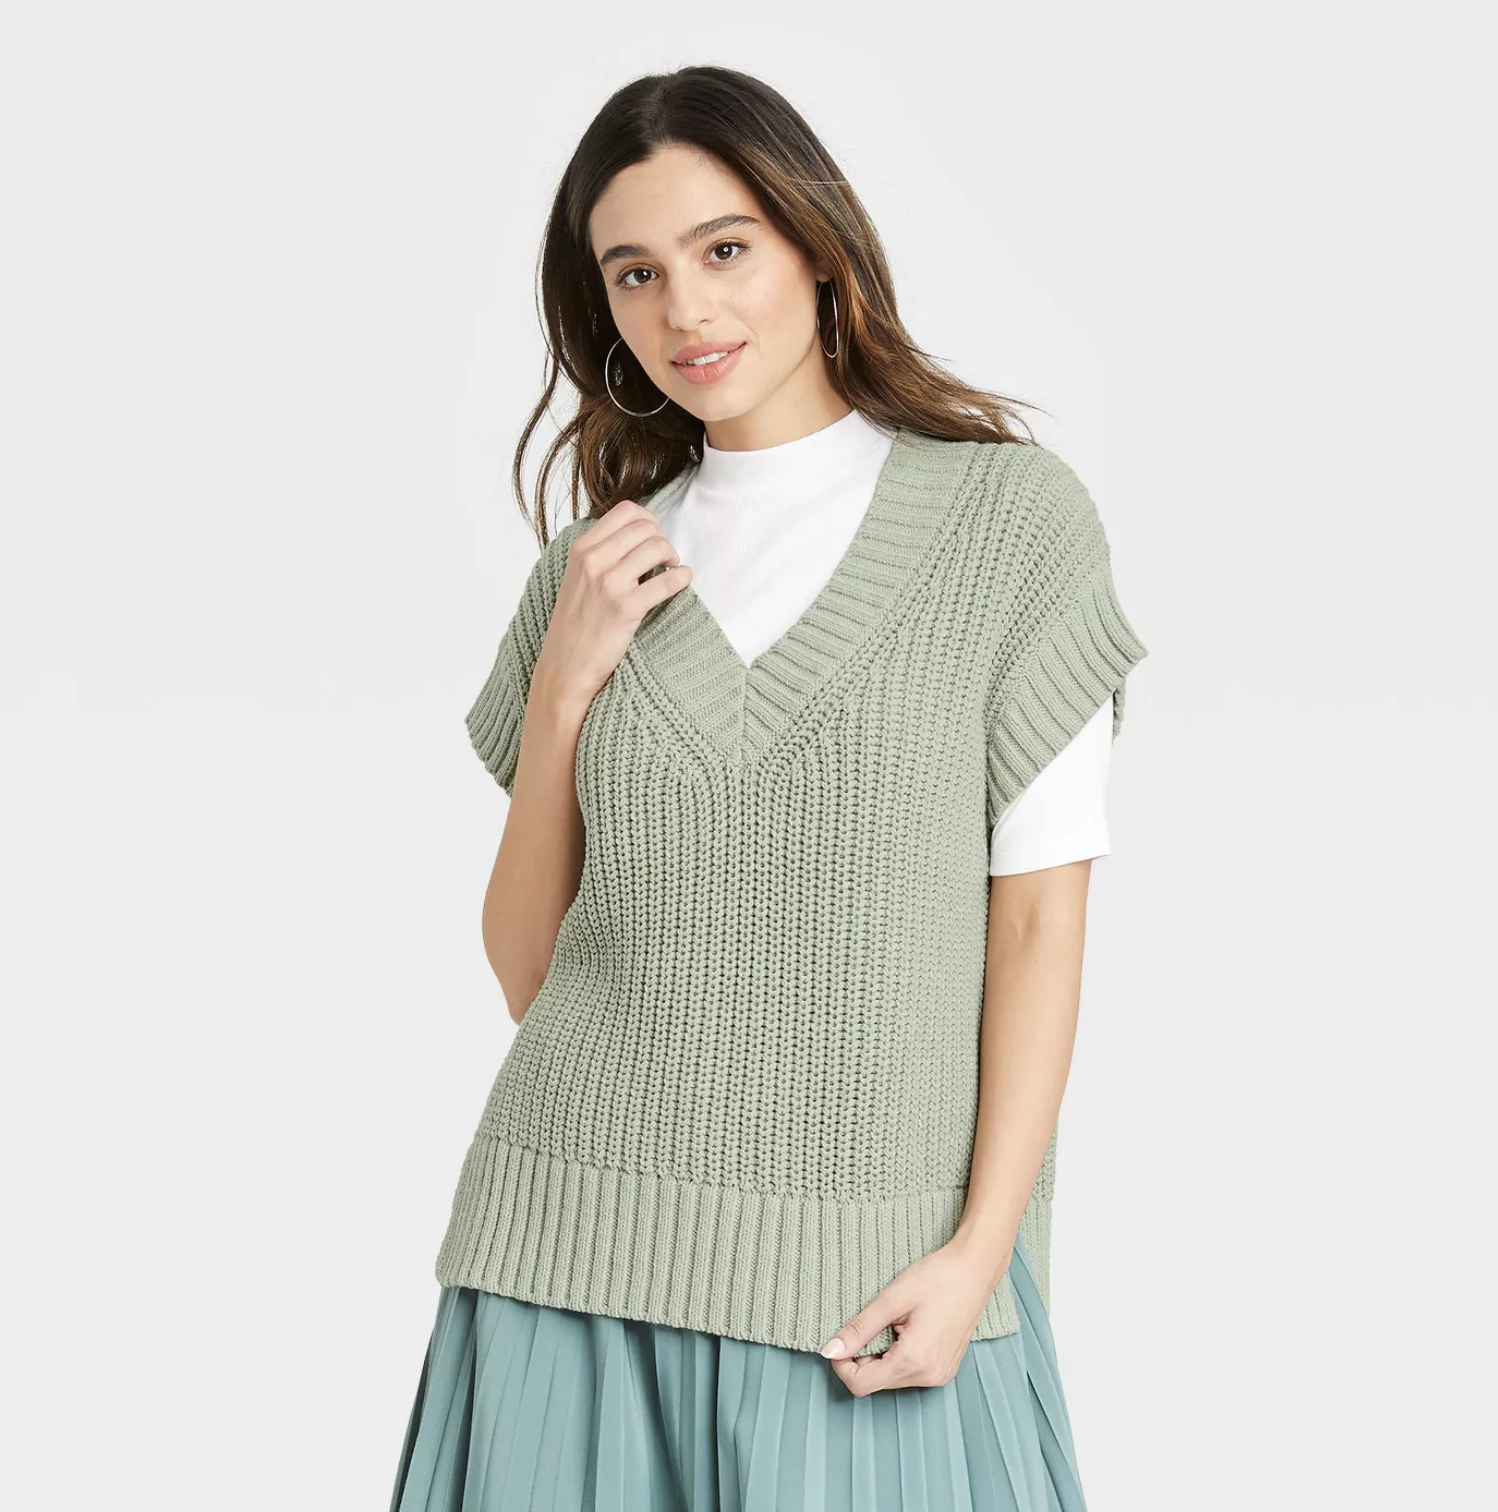 model wearing the sweater vest in green over a white shirt